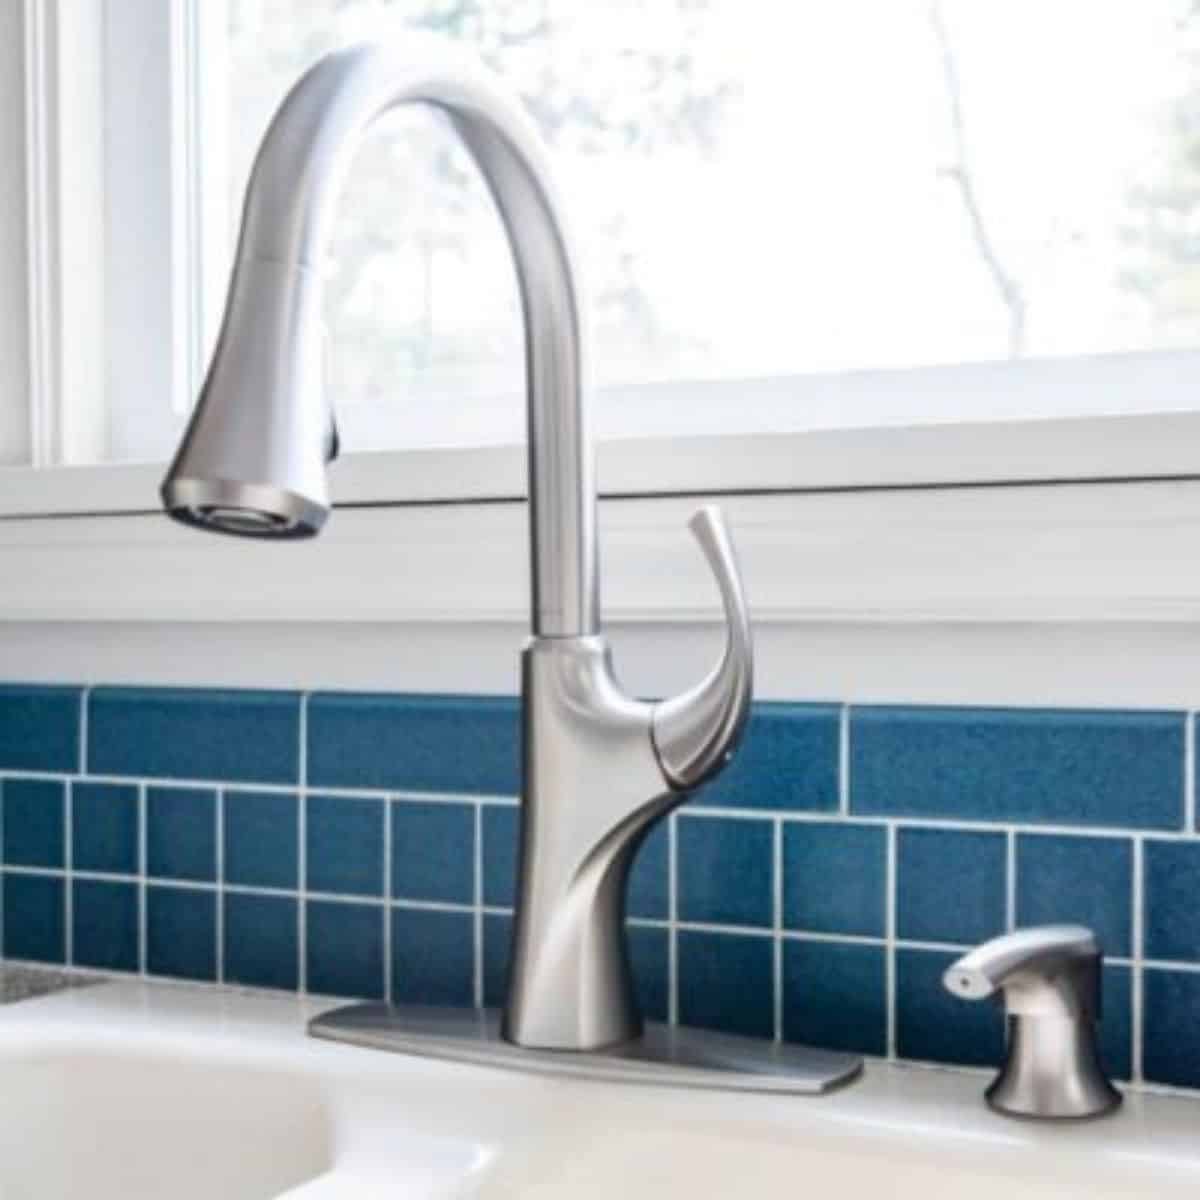 https://www.thehandymansdaughter.com/wp-content/uploads/2021/06/how-to-change-a-kitchen-faucet-The-Handymans-Daughter-1200-sq.jpg